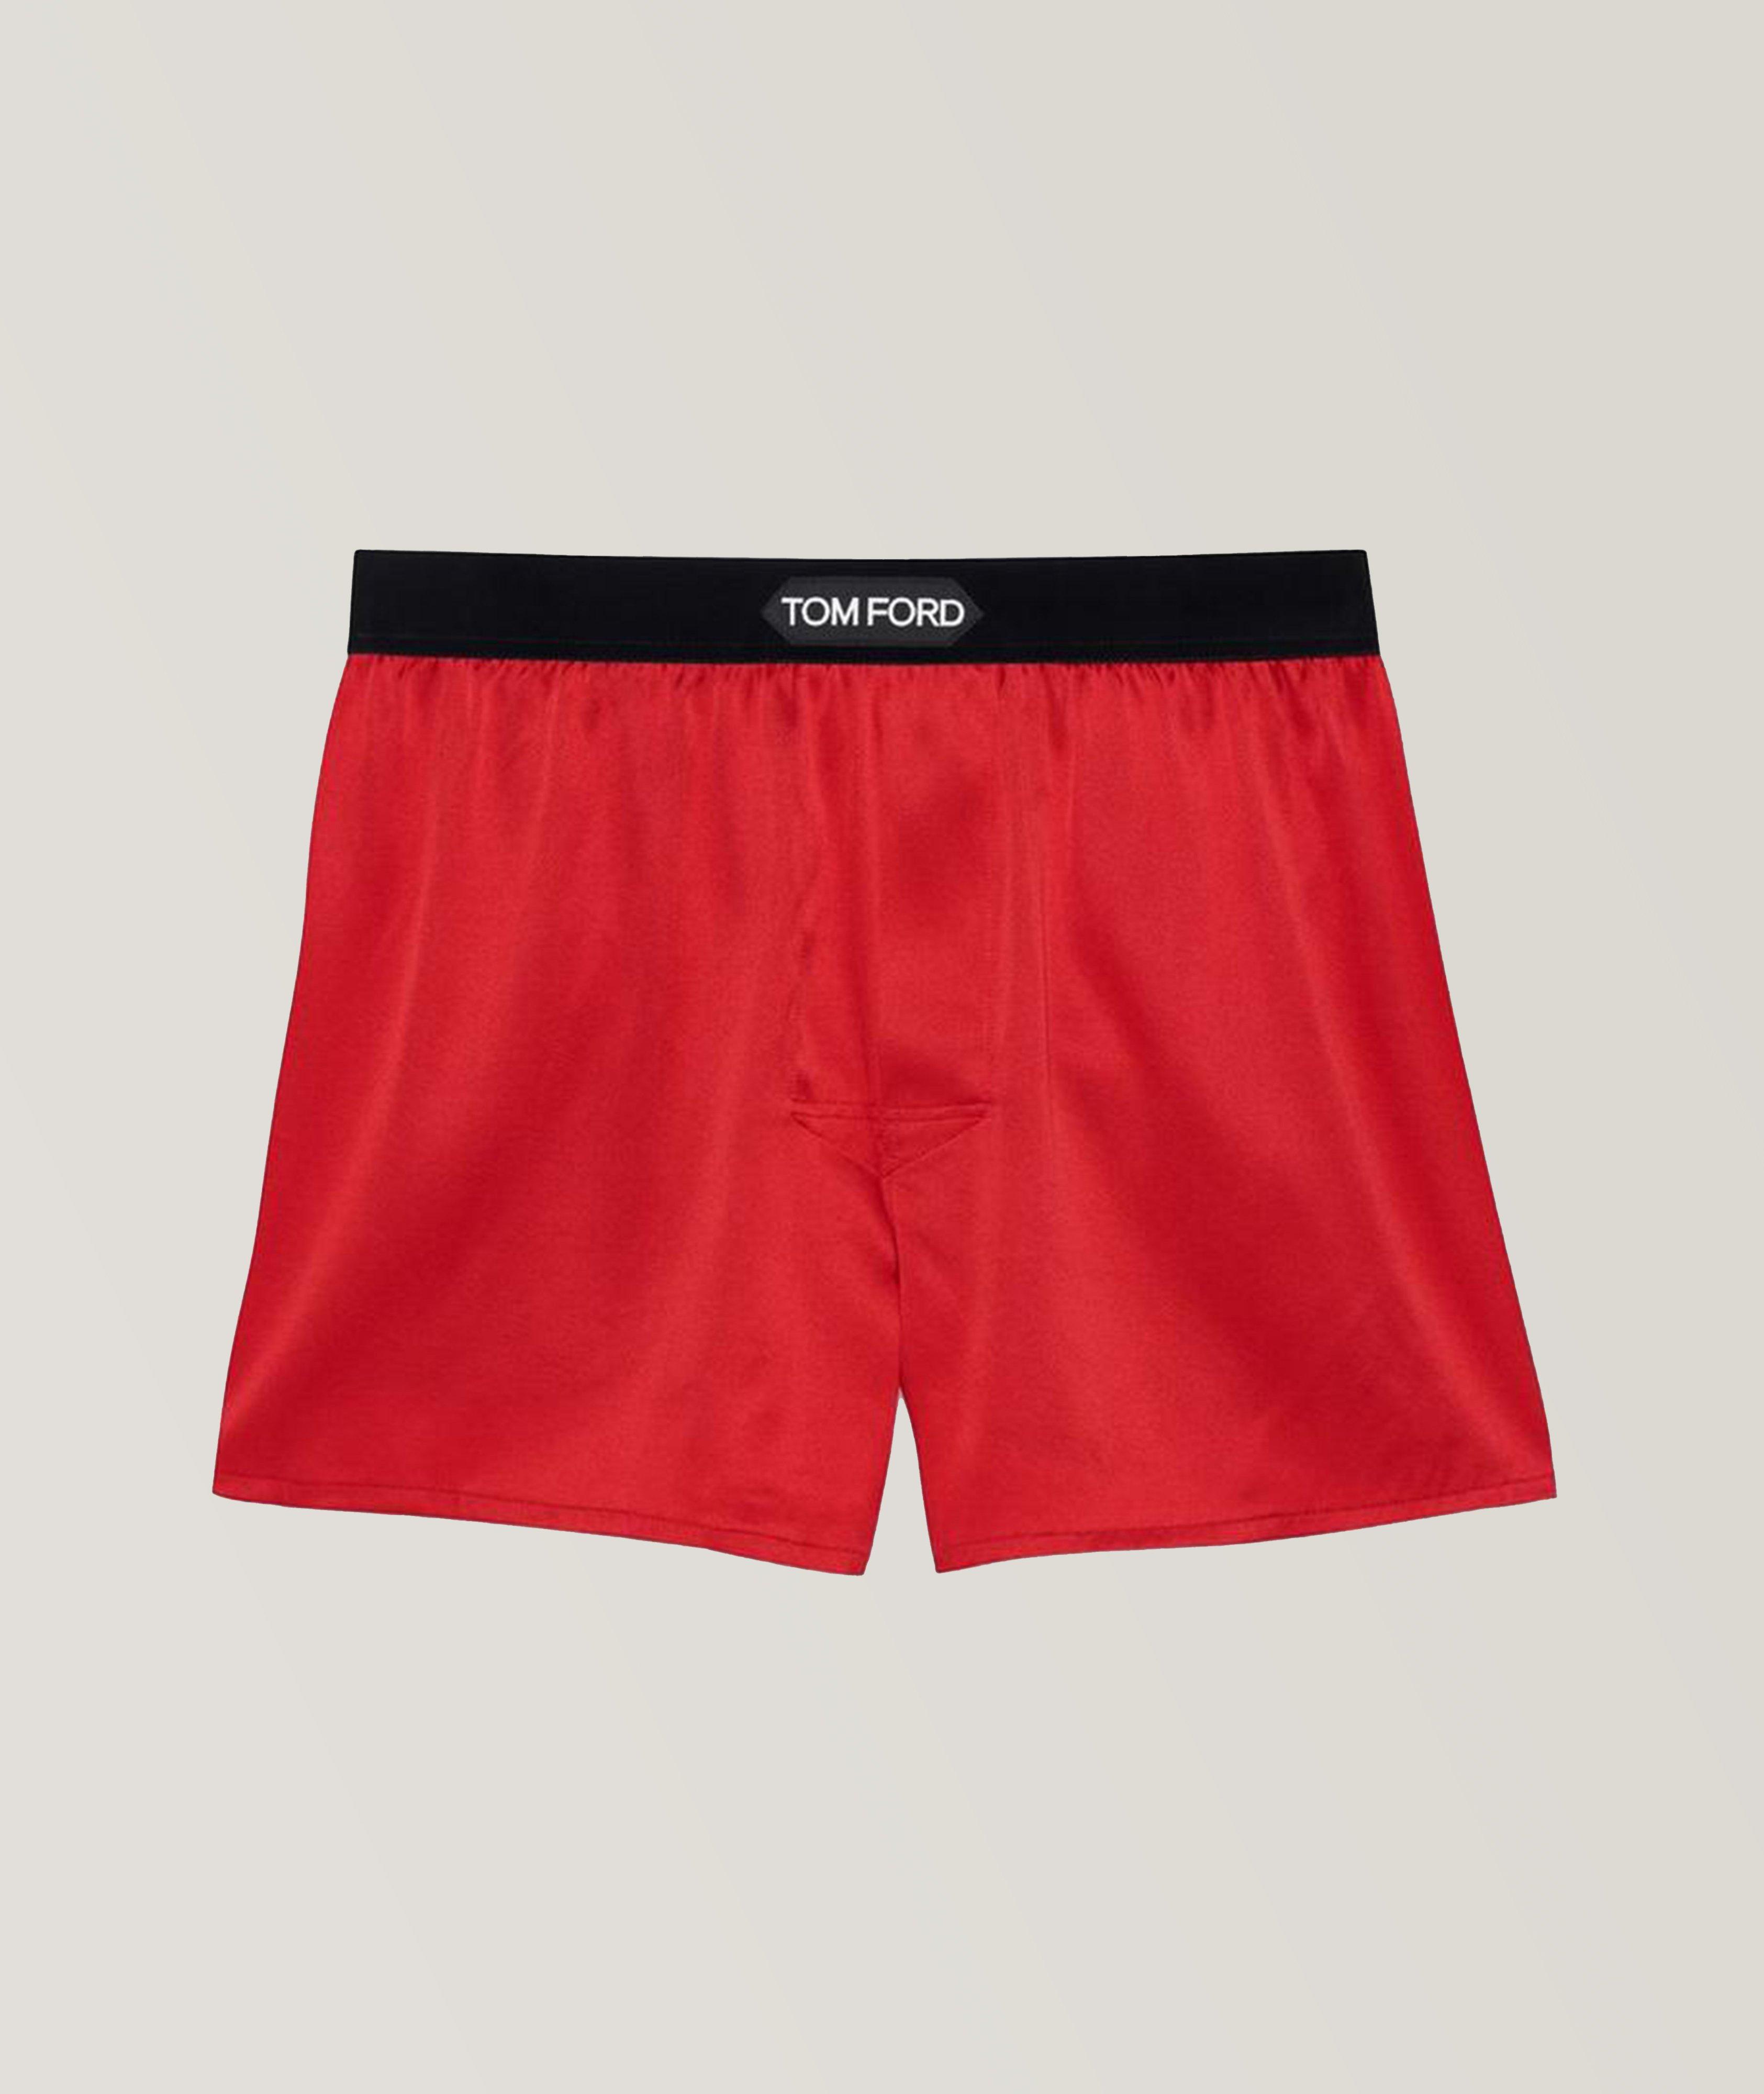 Short Stretch-Silk Boxers image 0